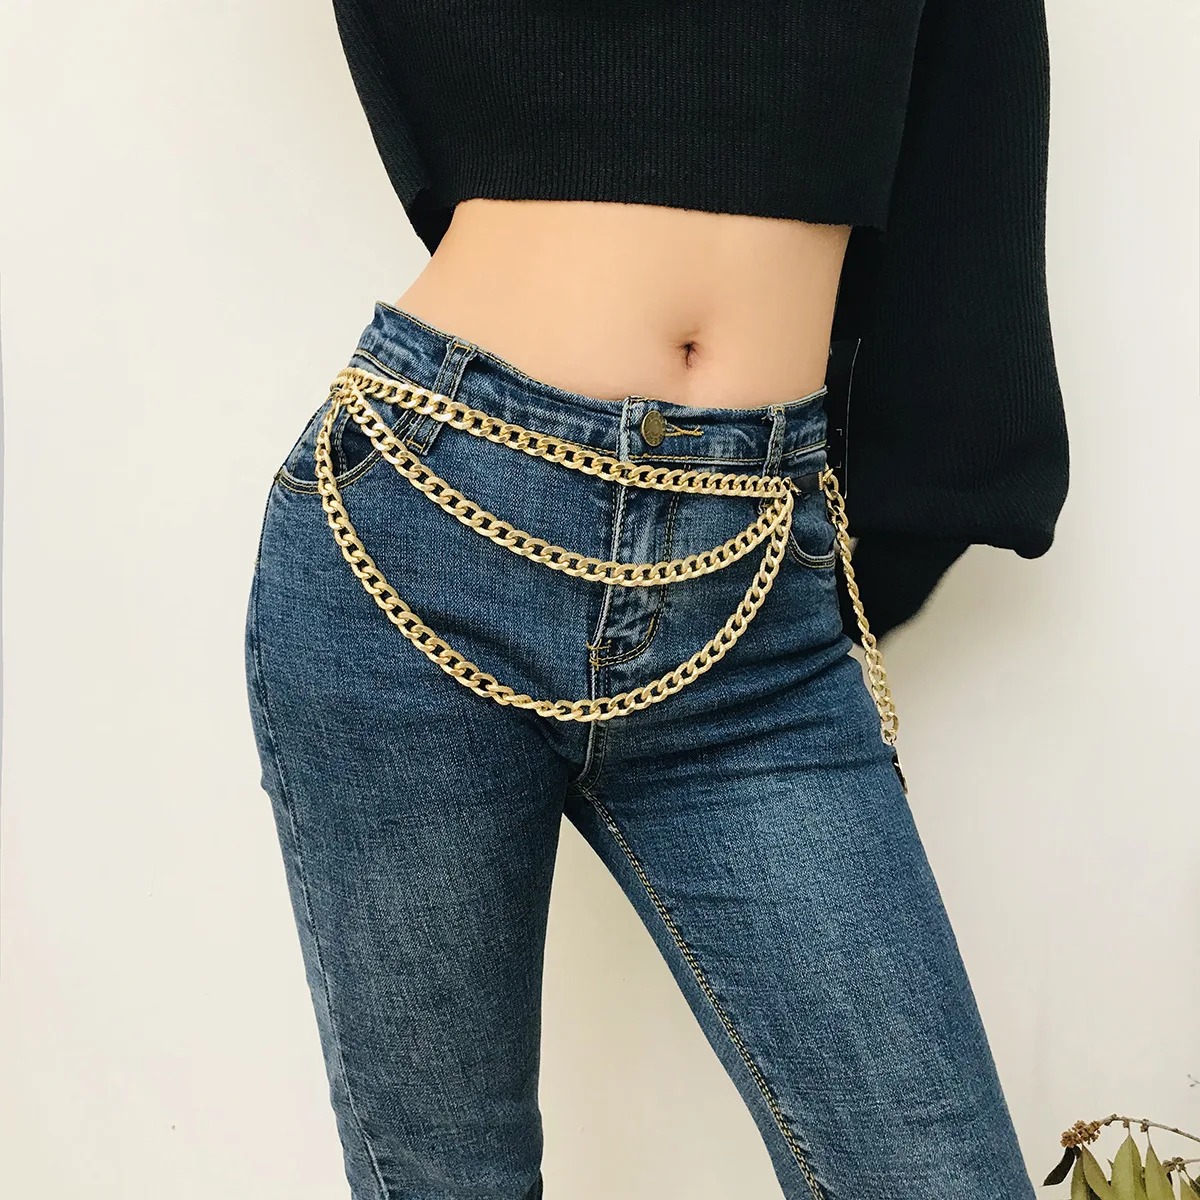 

Women Trendy Multilayer Metal Link alloy Waist Chain for Dress Coat Jeans Long Tassel sexy Belly Chains Waistbands, Picture shows